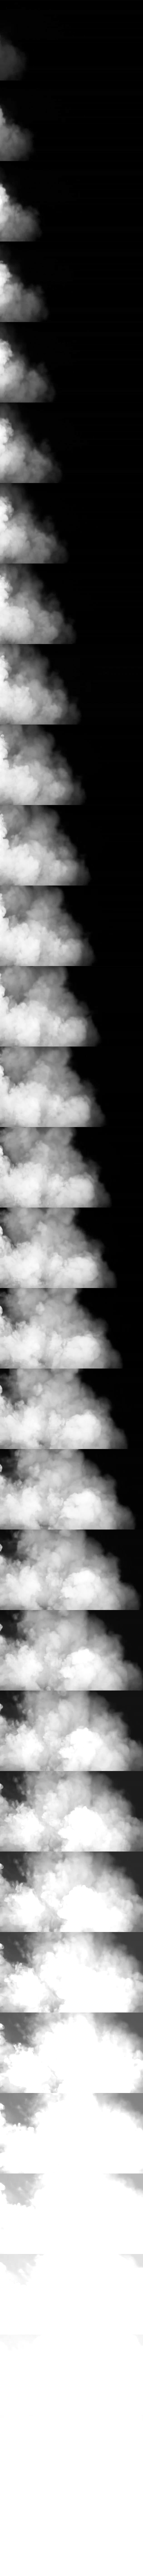 Day3 : Smoke svg animation | Quentin Renaux